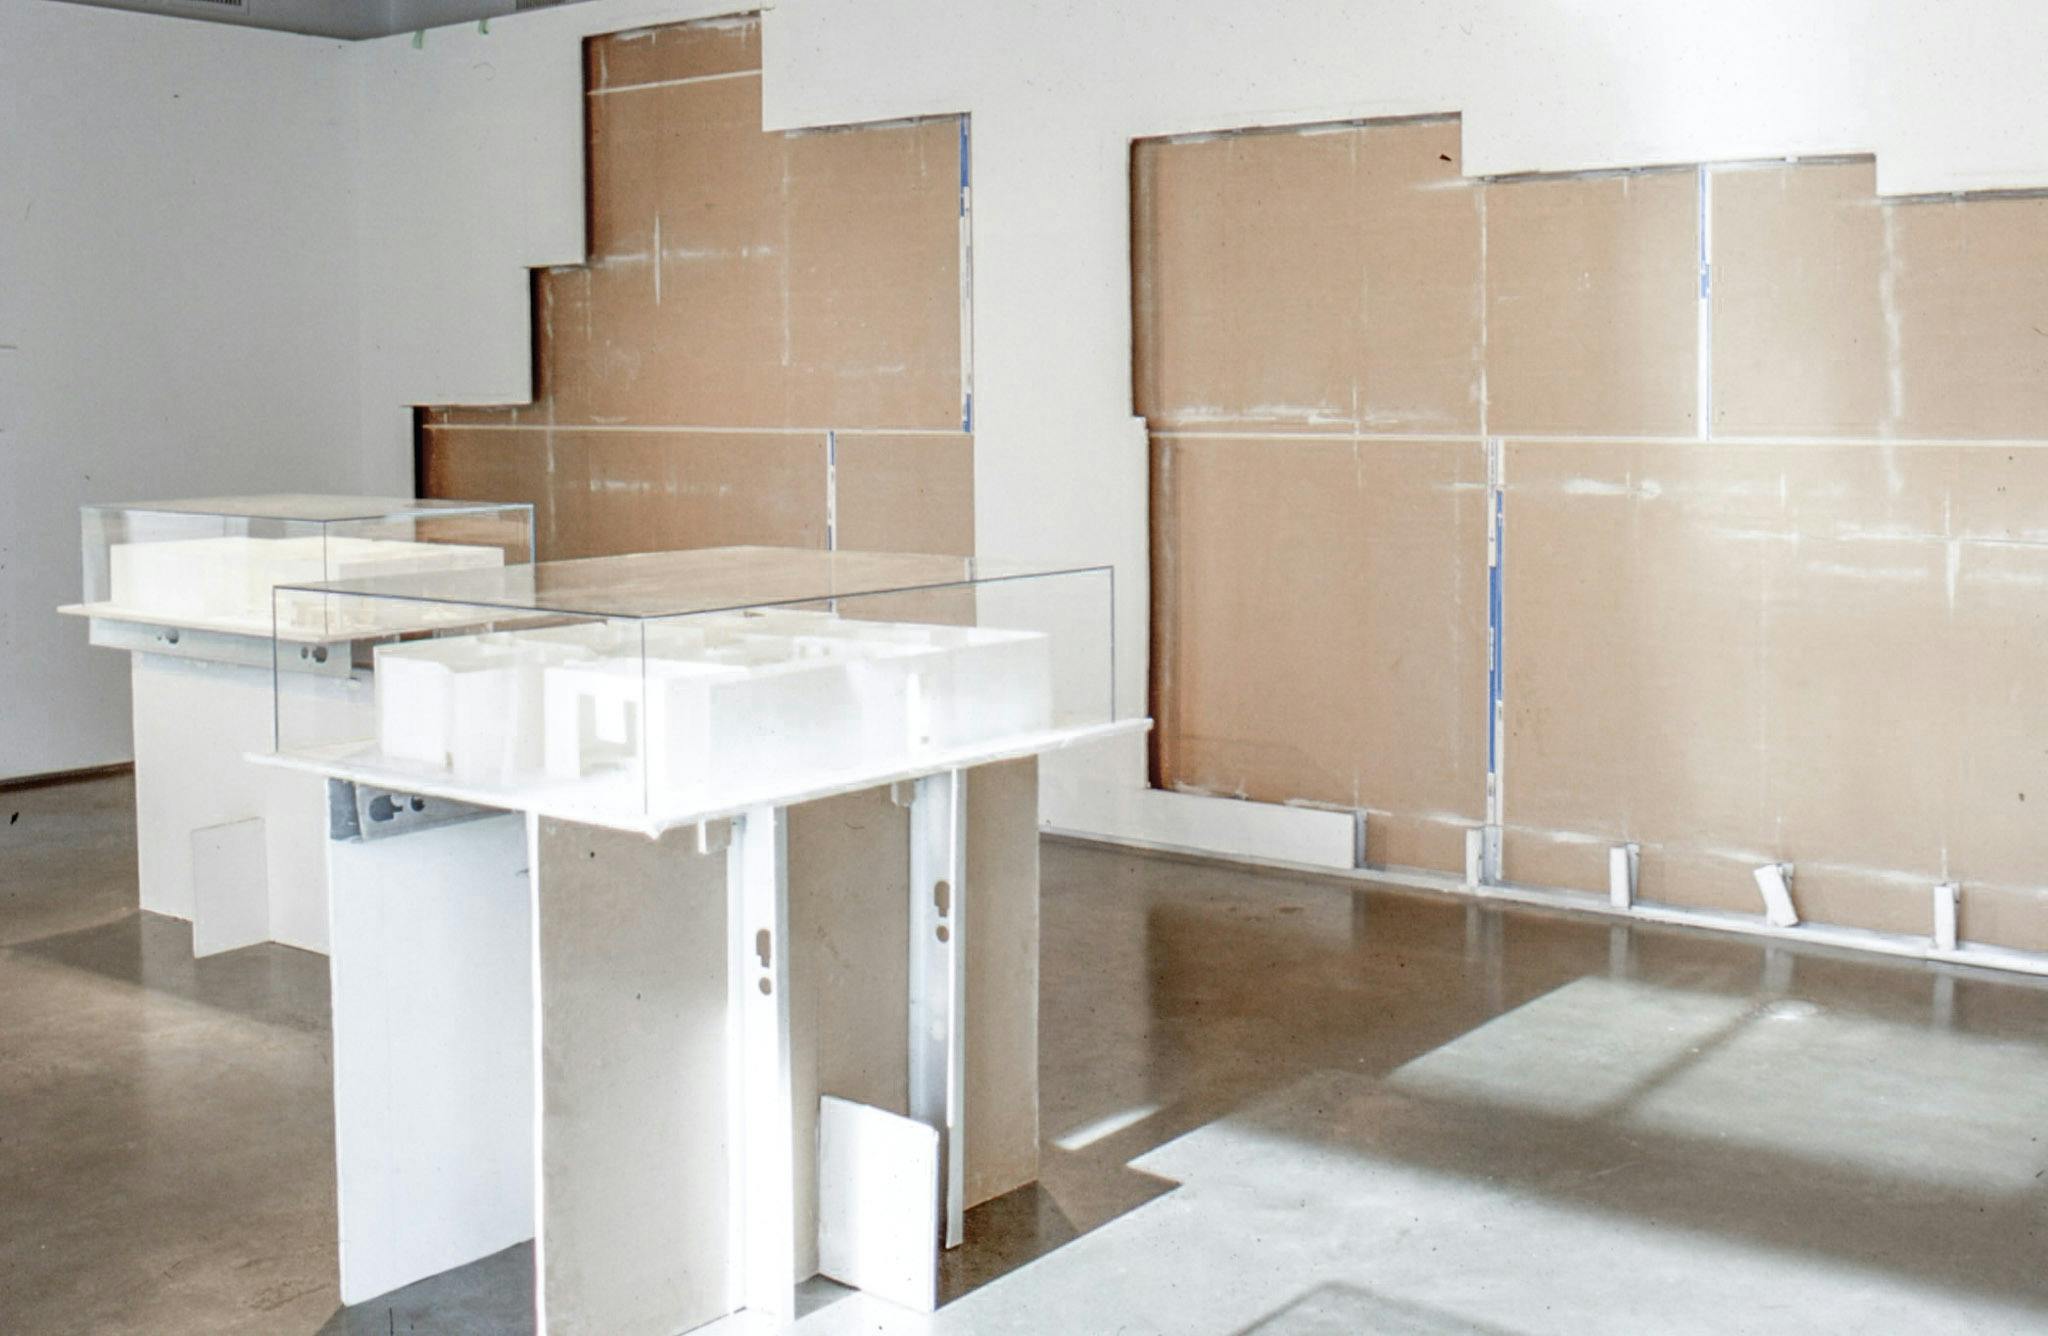 A set of white sculptures in display boxes are placed in a gallery space. White tiles on the gallery wall were removed, making the brown internal part of the wall visible. 